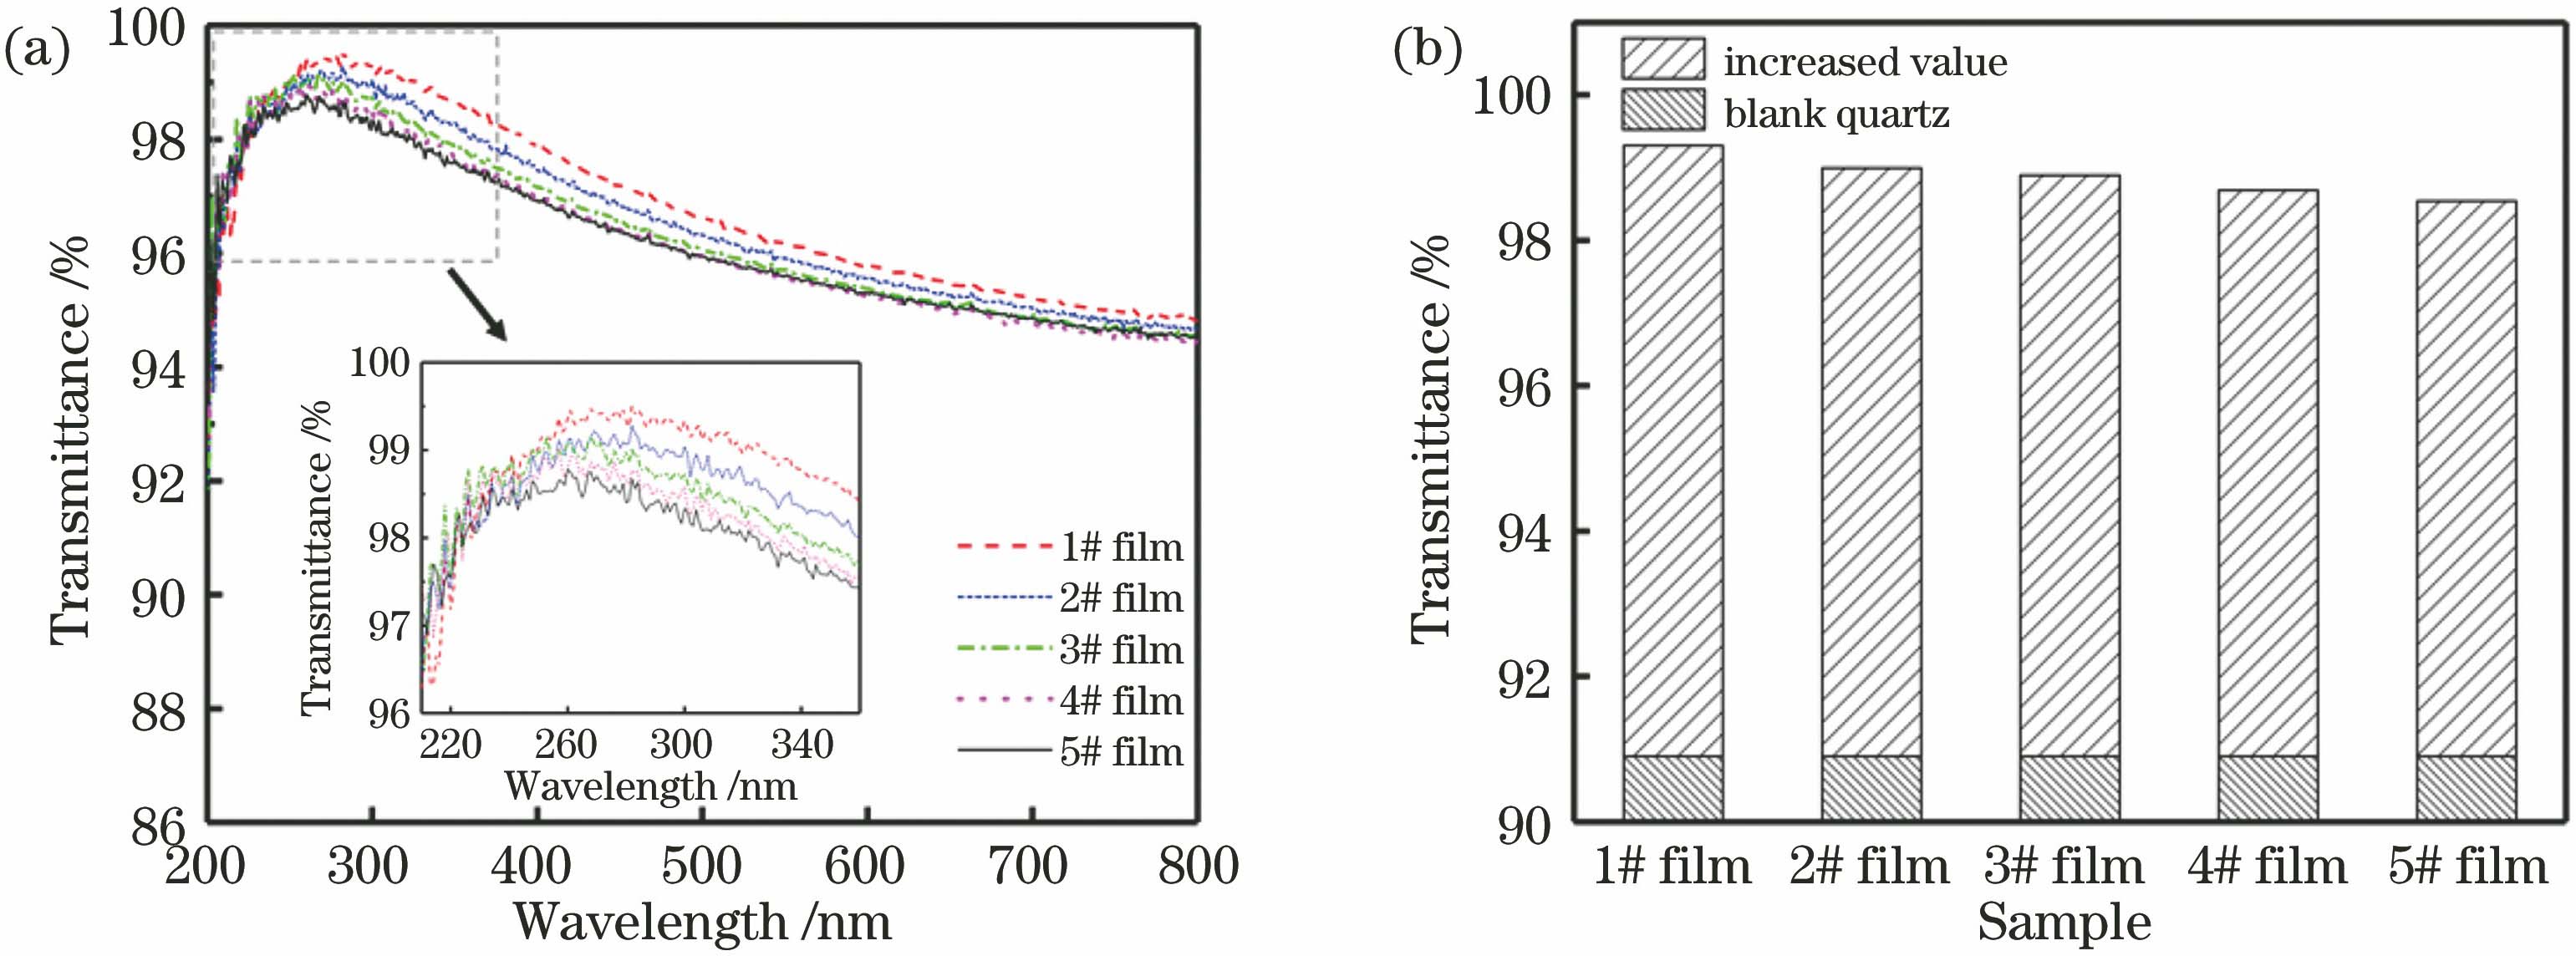 Optical properties of fourth harmonic generation SiO2 antireflective films. (a) Transmittance curves; (b) transmittance values at 266 nm